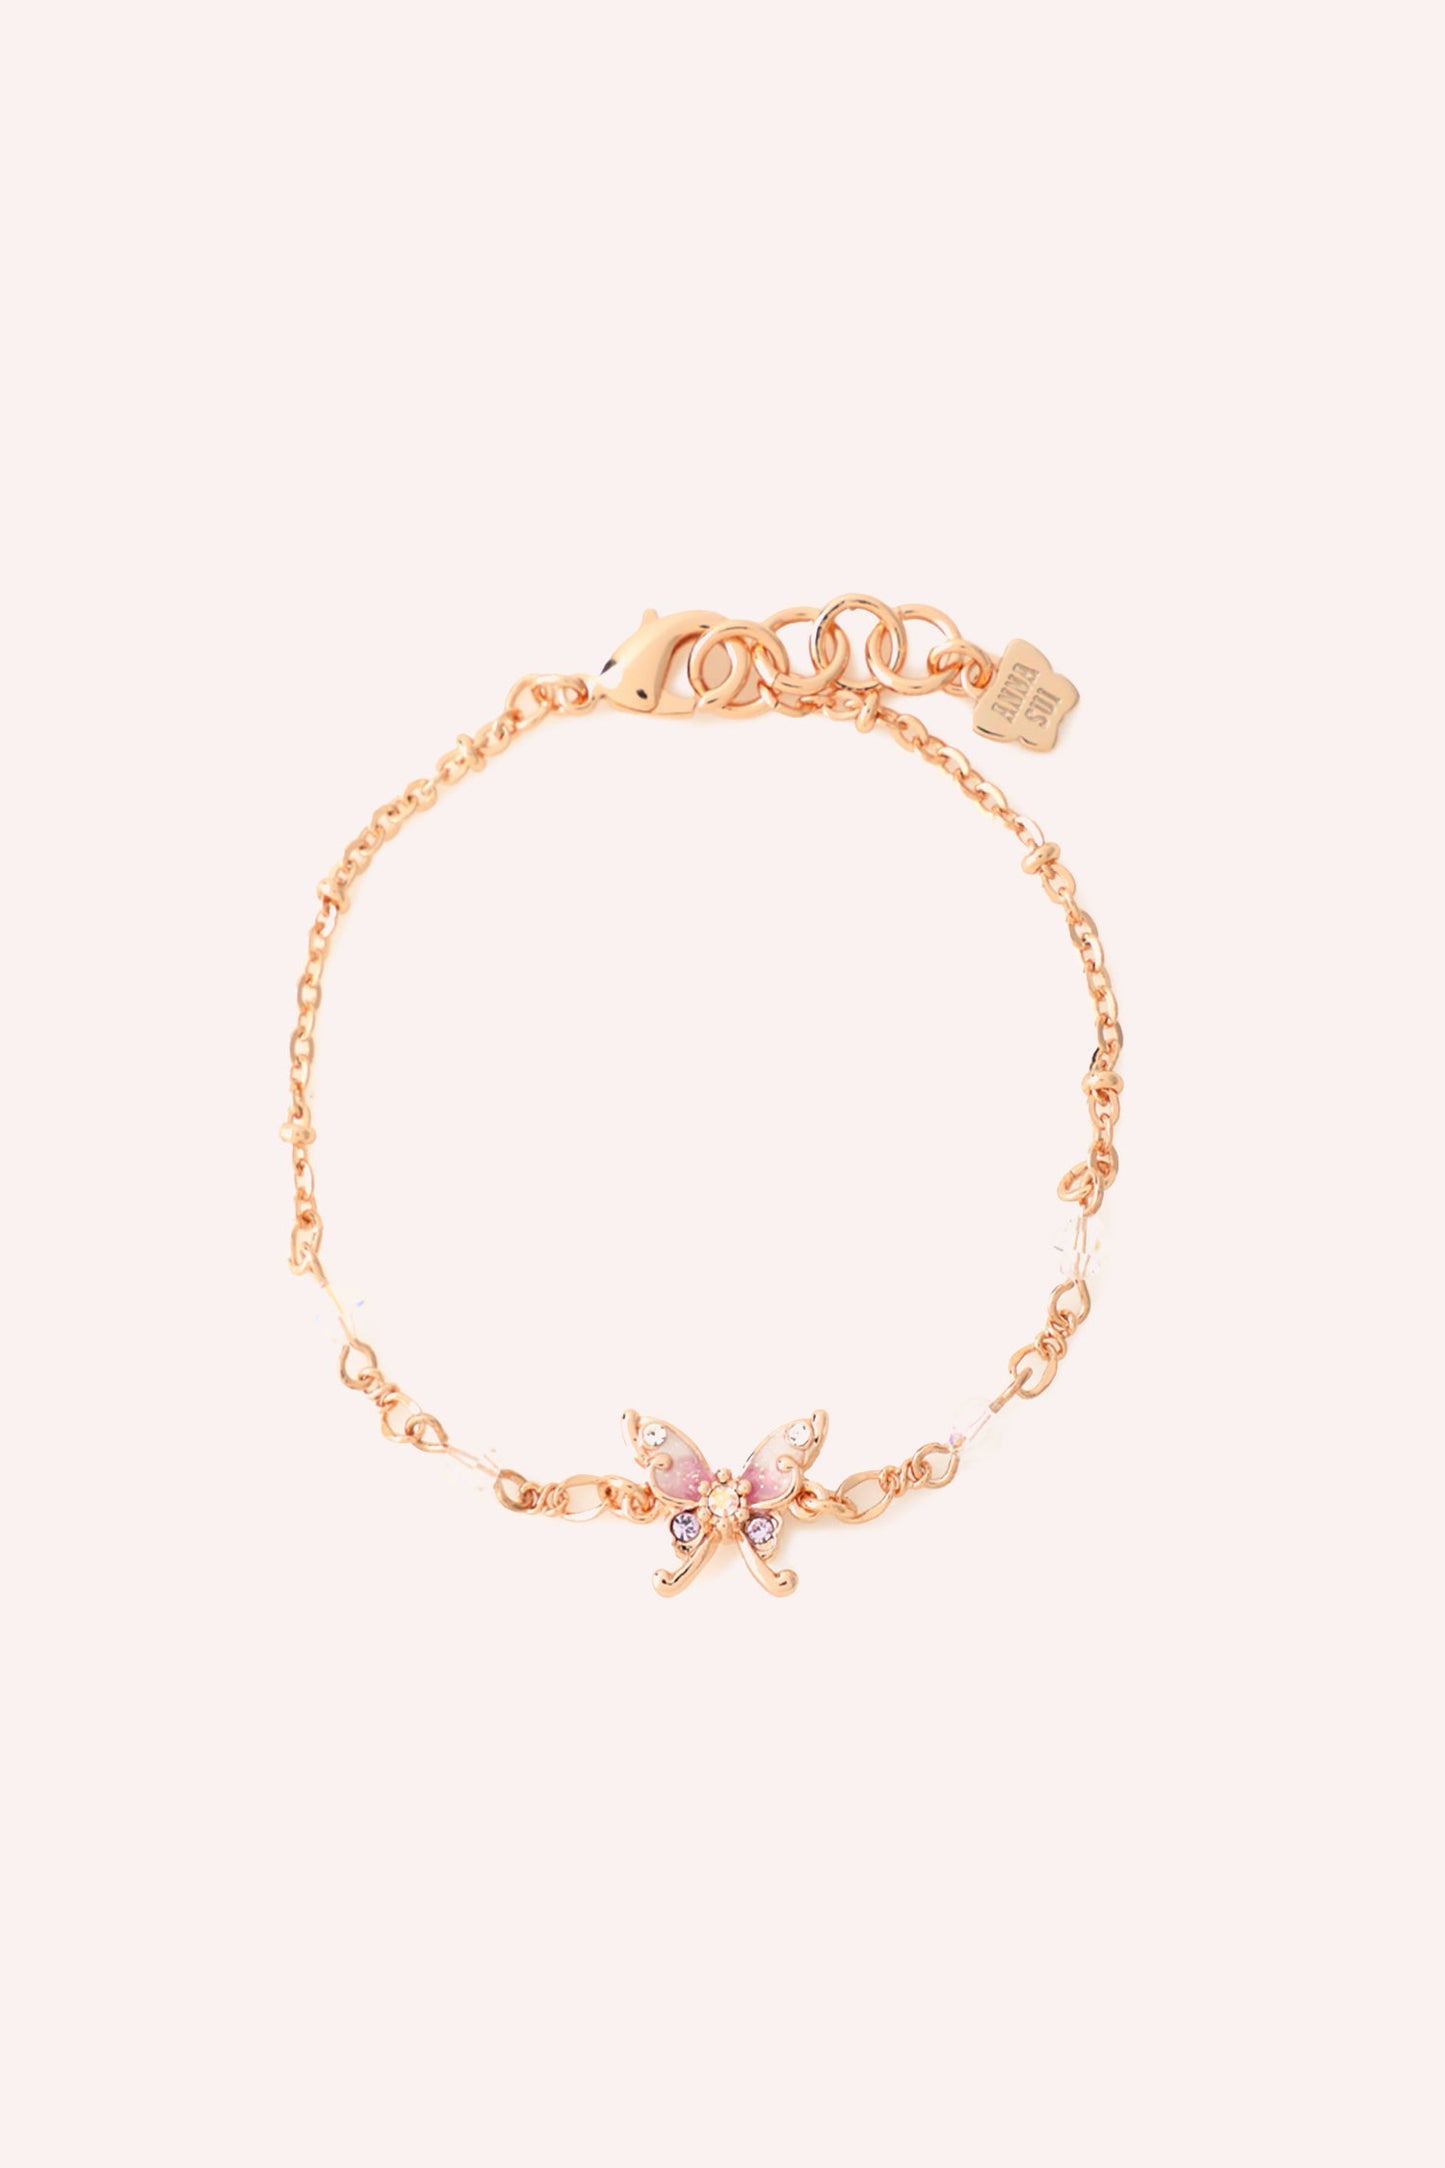 Bracelet, rose gold Toned Bracelet Embellished with Purple Gems and a Purple Butterfly Charm